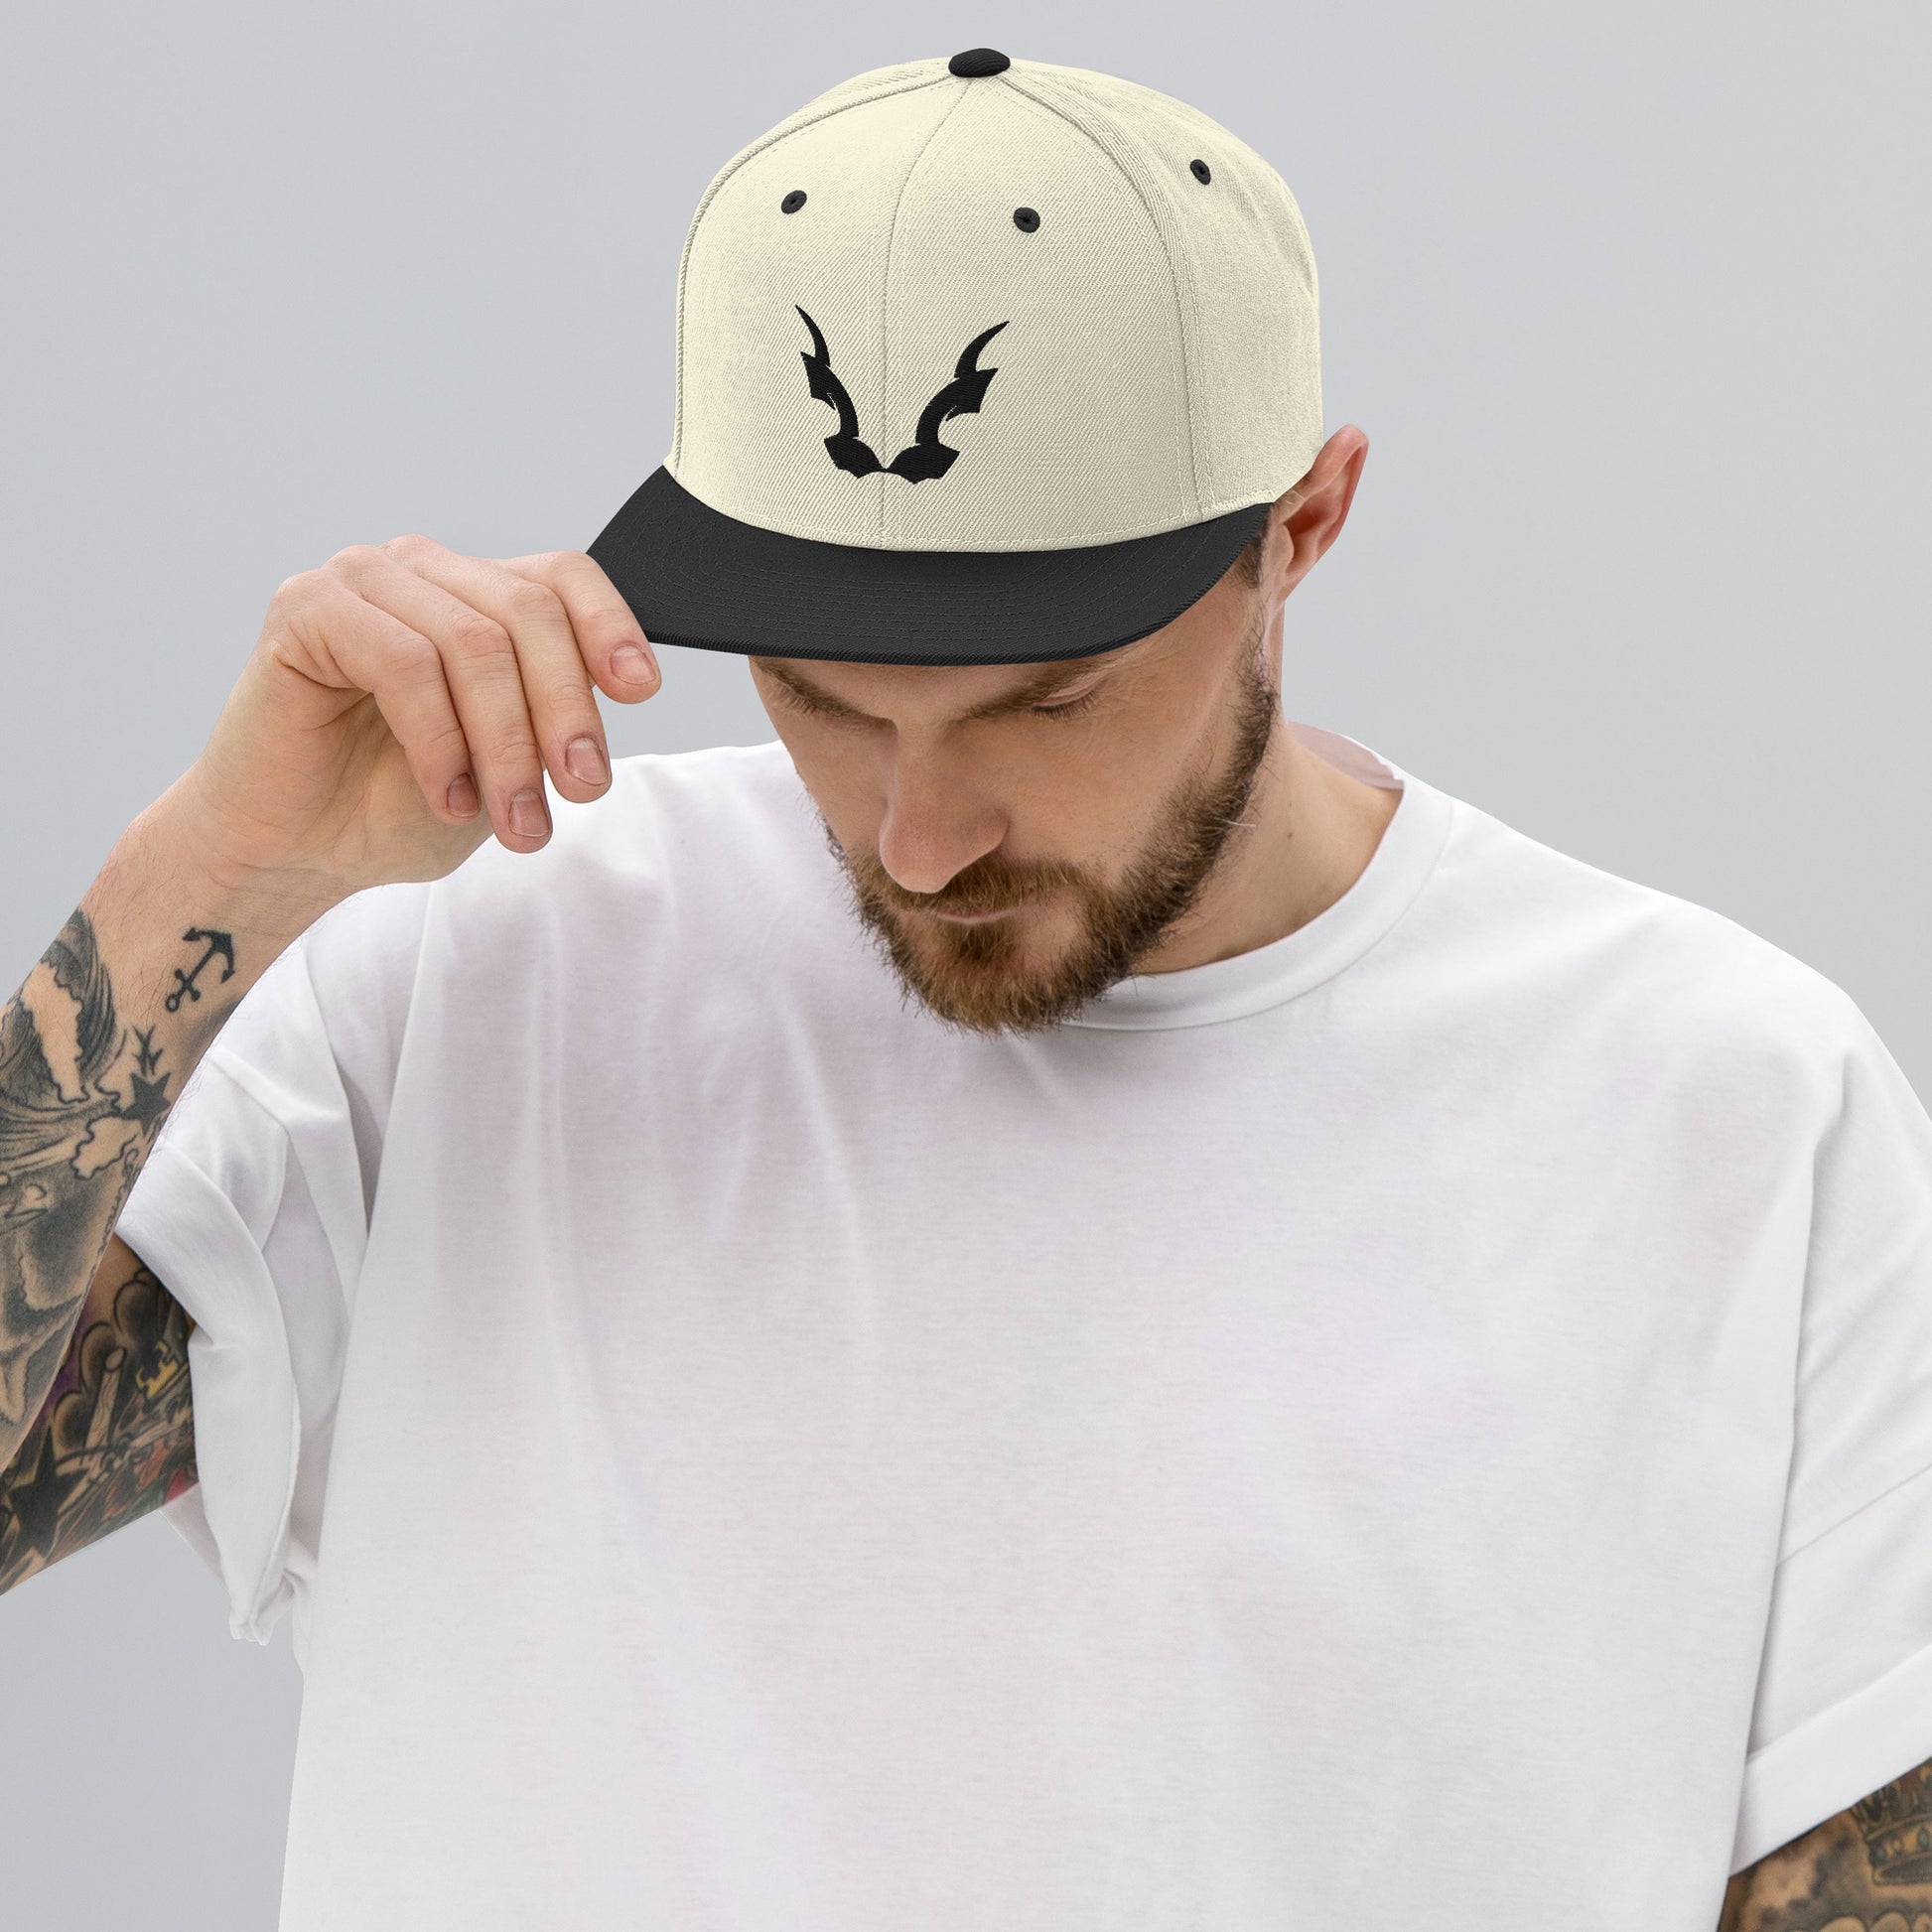 Snapback Hat With Markhor Horns Is On Its Way To Merch